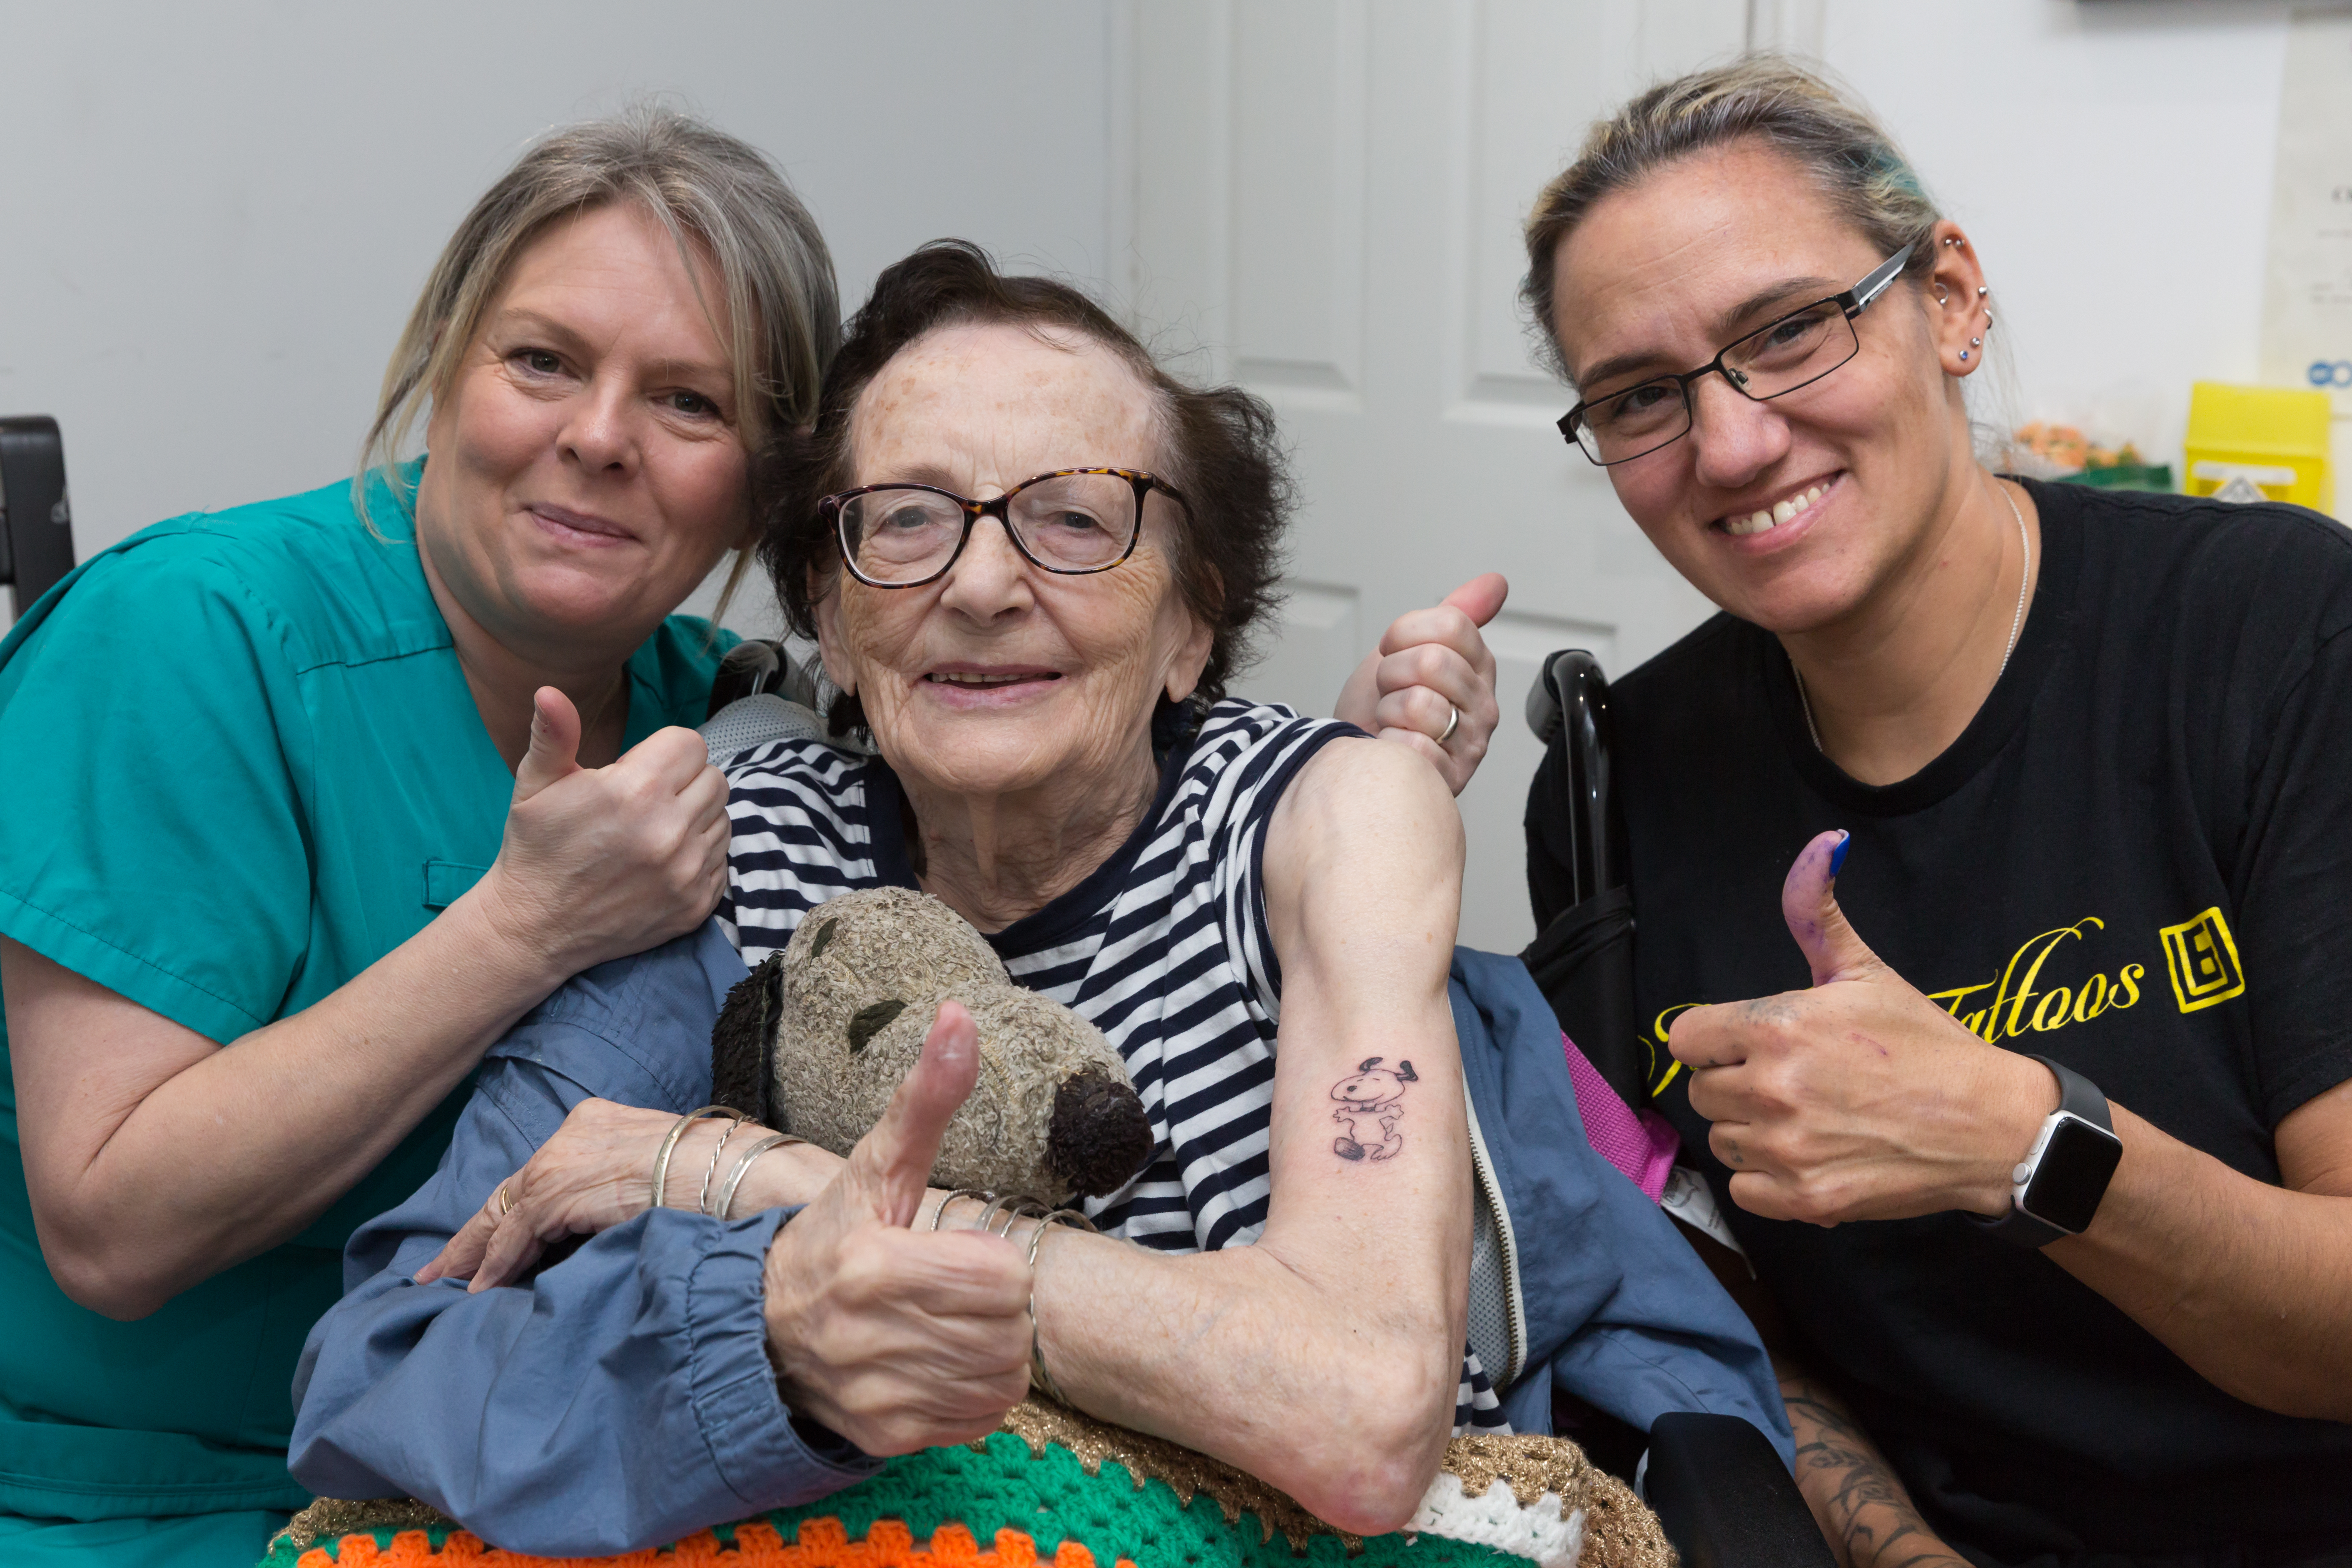 Care home resident after getting her first tattoo